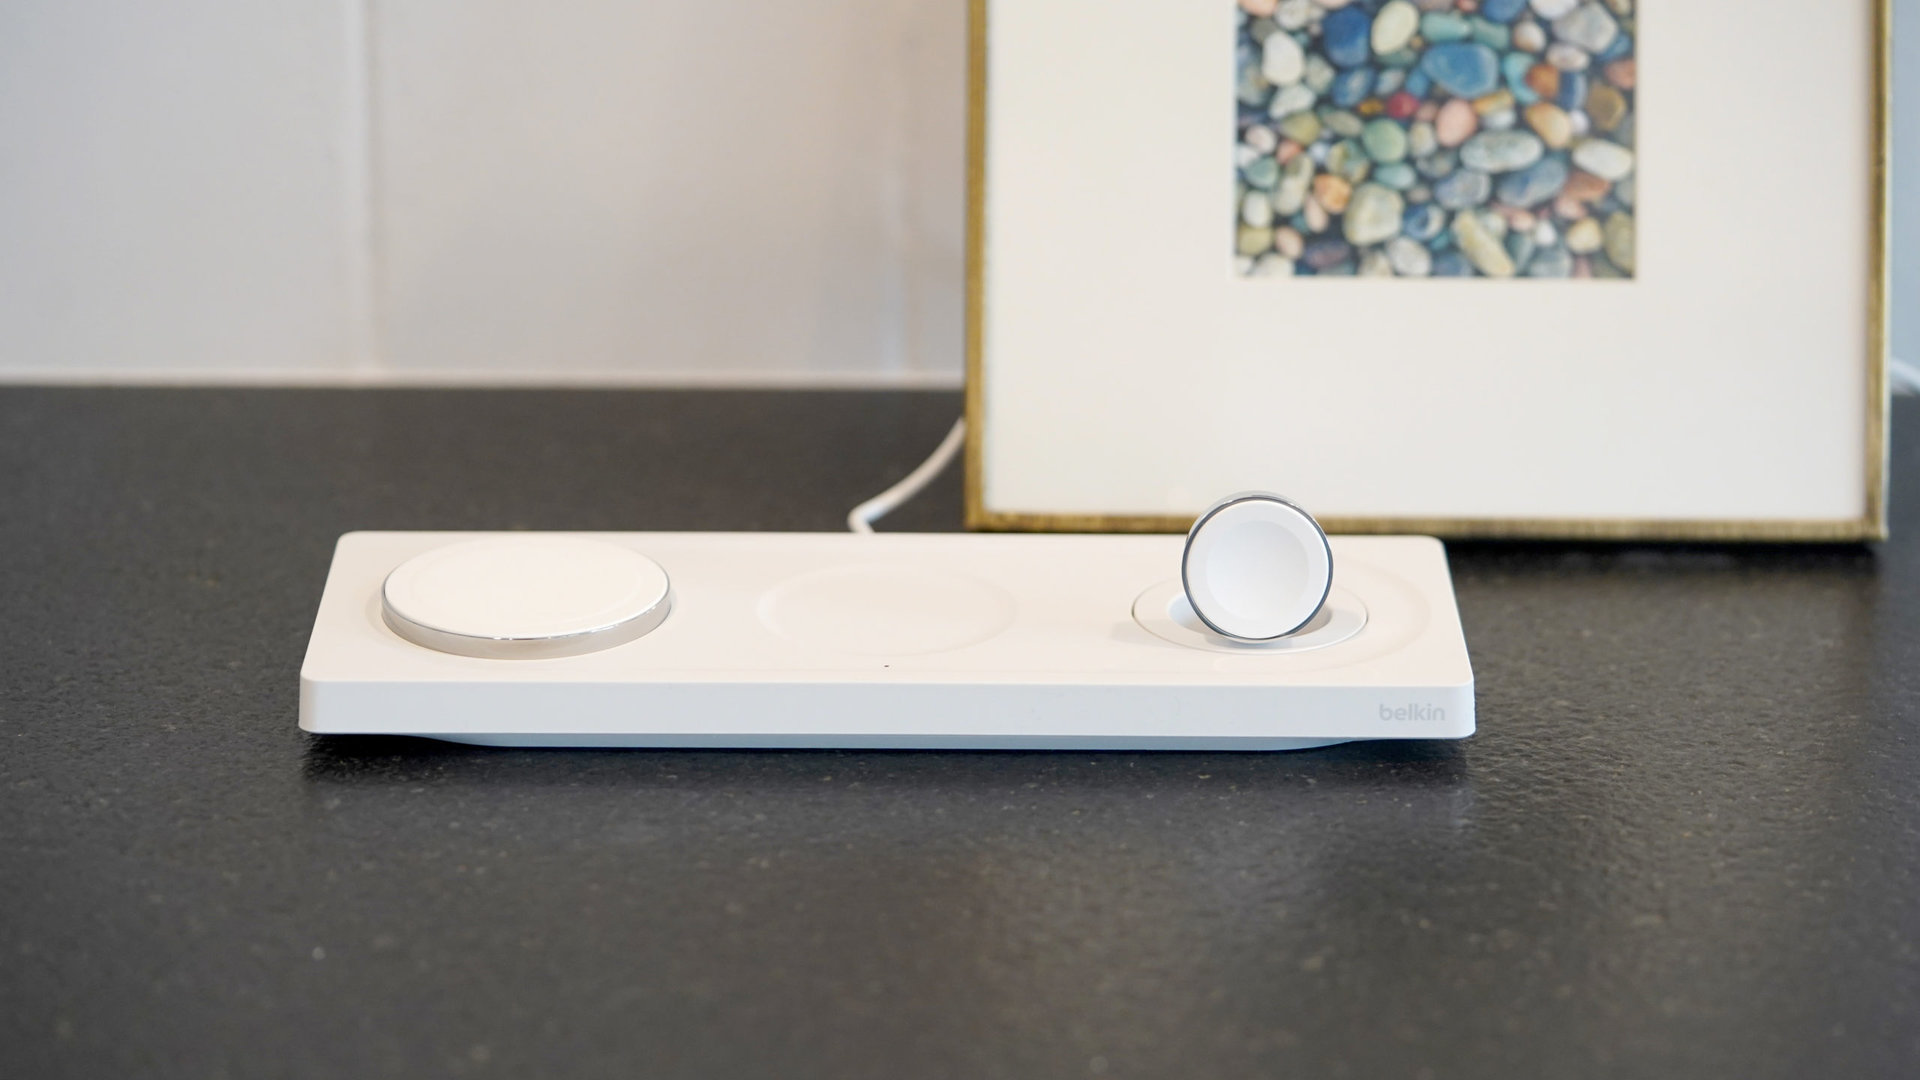 A Belkin BoostCharge Pro 3-in-1 Wireless Charging Pad rests on a black countertop.